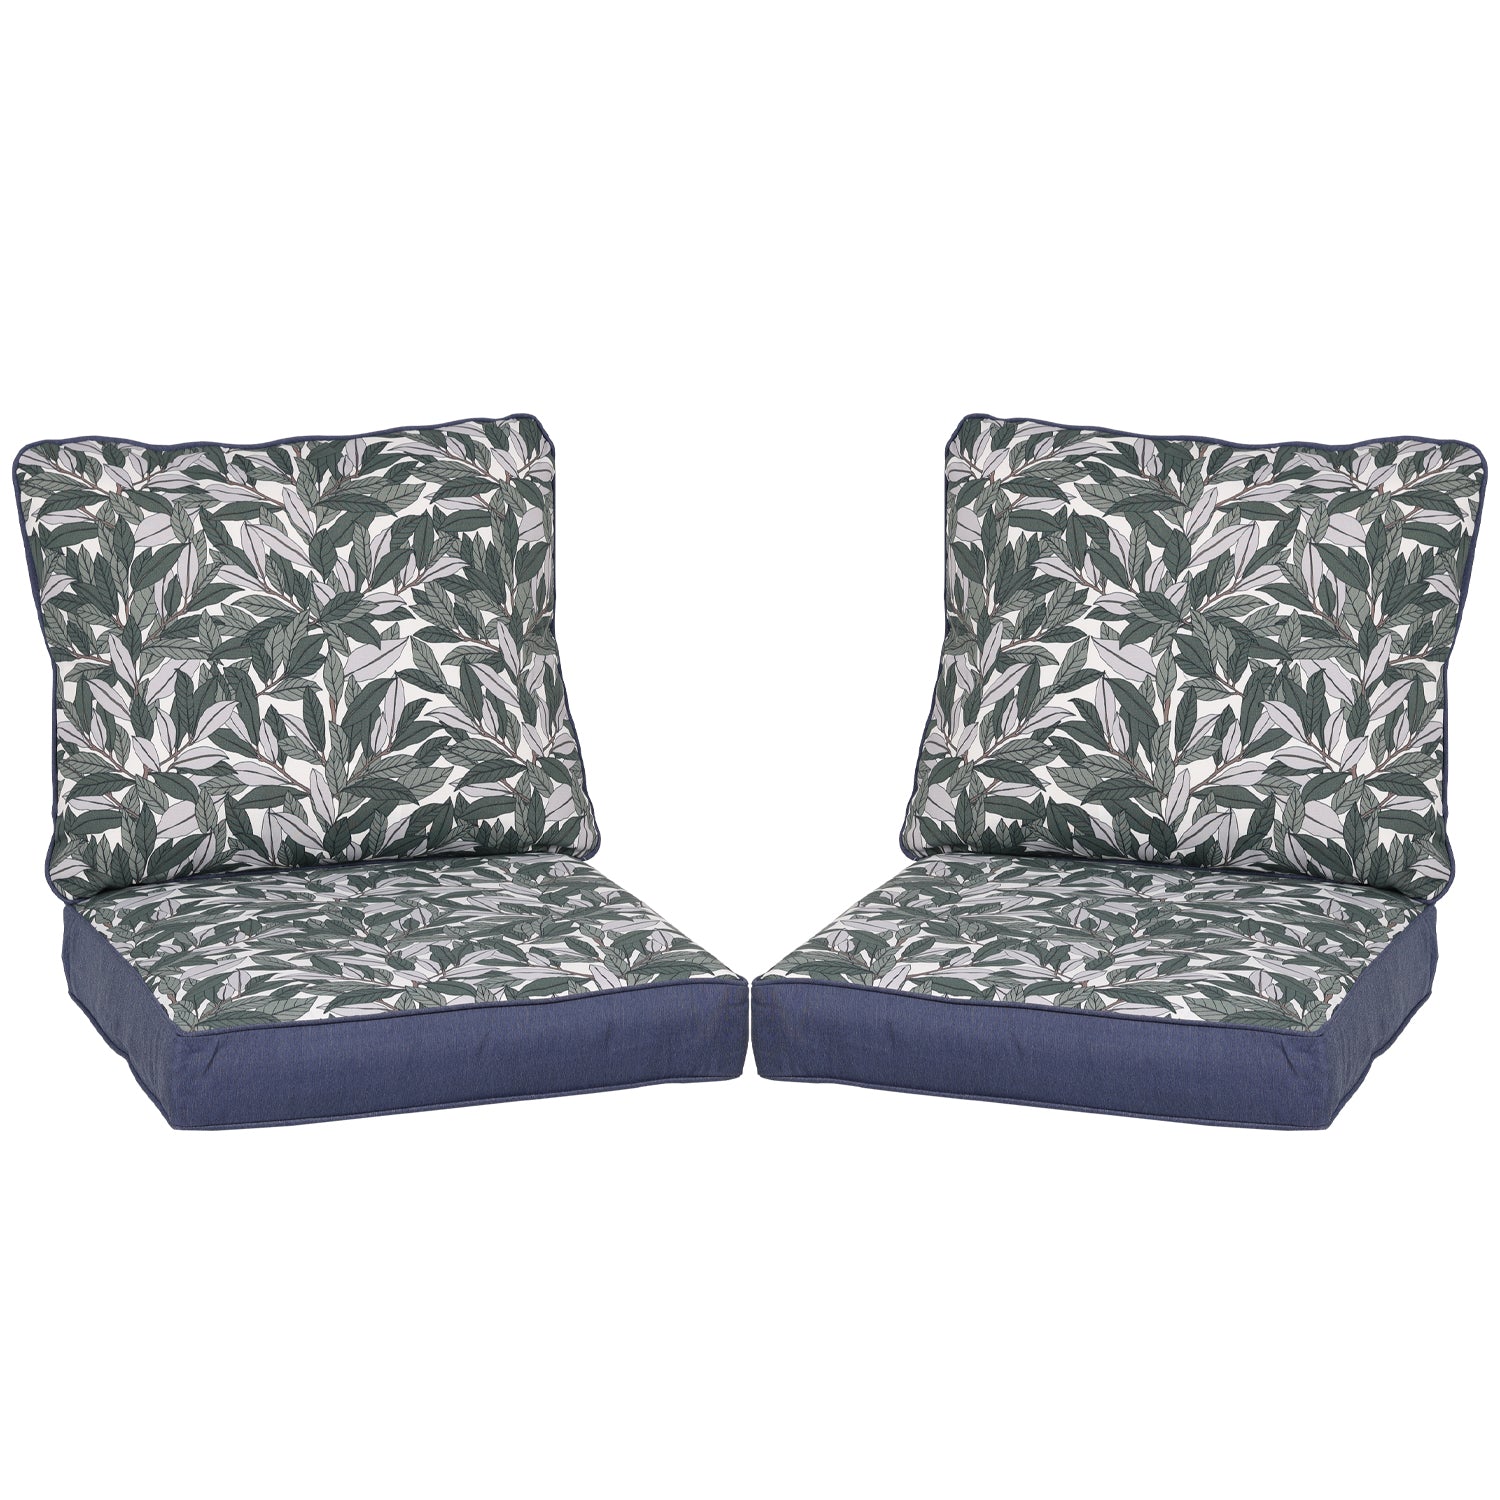 23'' x 24'' Outdoor Deep Seat Chair Cushion Set with Dust Jacket, Olefin Fabric Slipcover and Sponge Foam - Set of 2 (2 Back, 2 Seater ) - Aoodor LLC